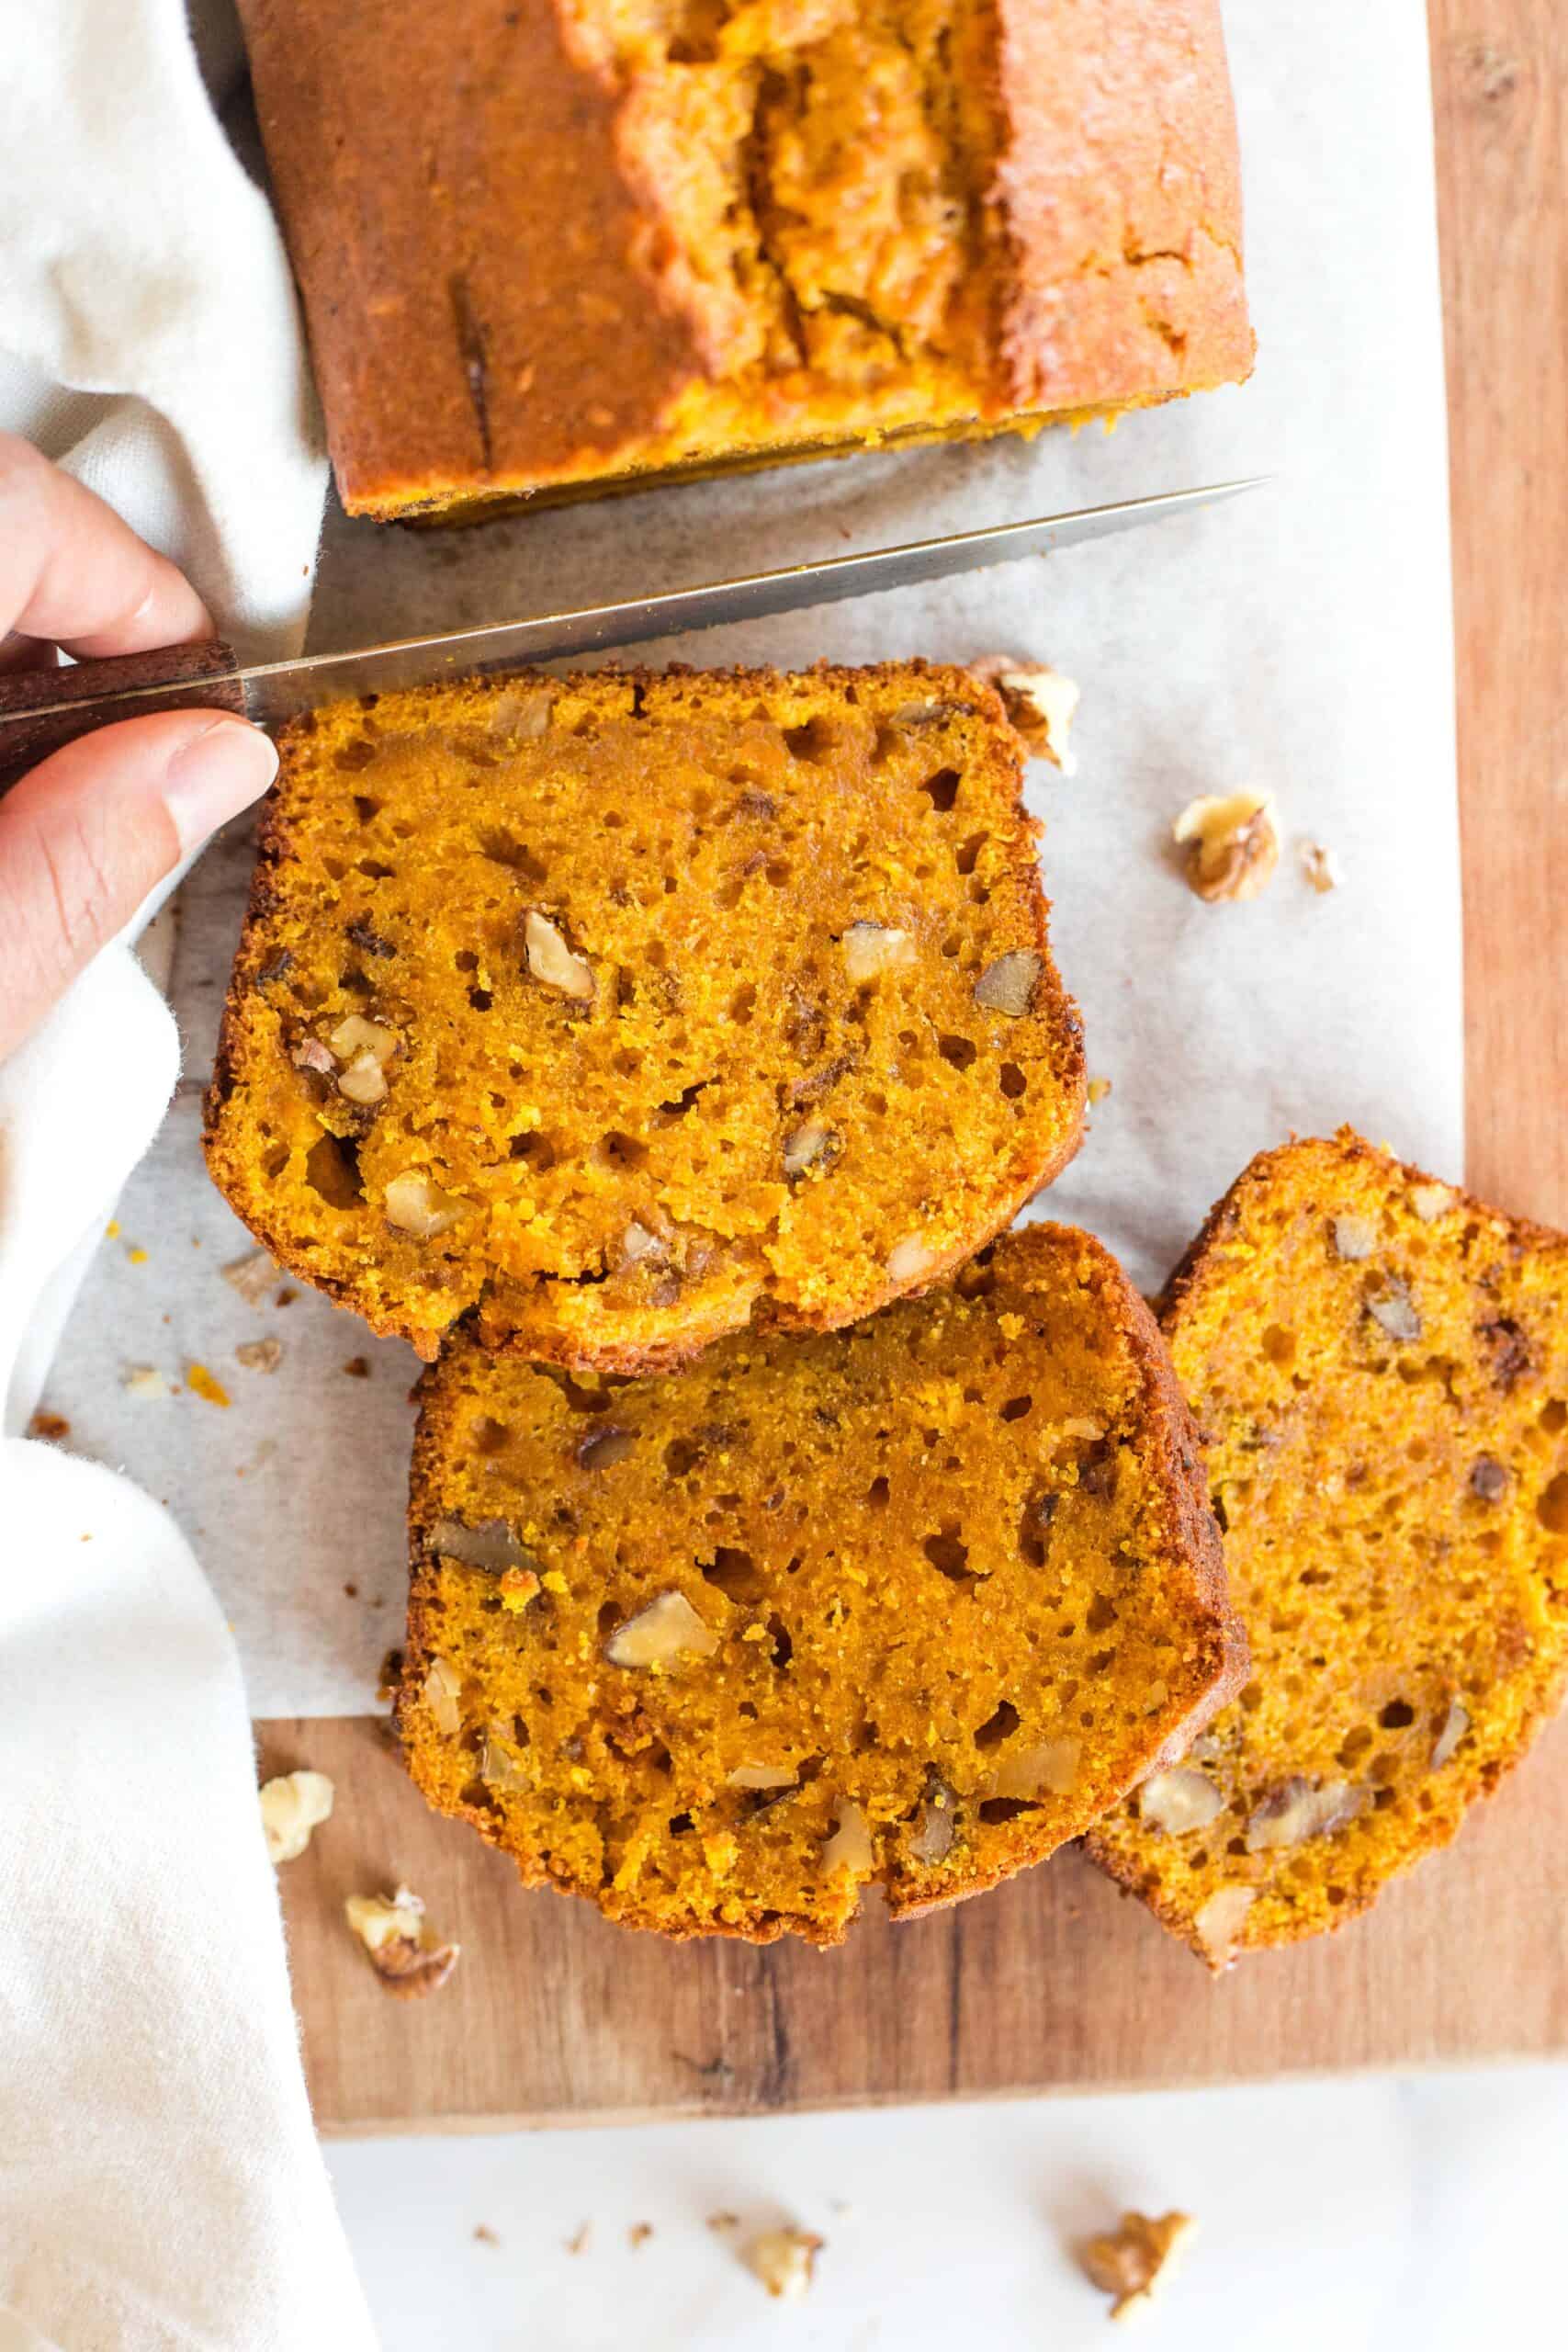 Slicing into a gluten-free sweet potato loaf.